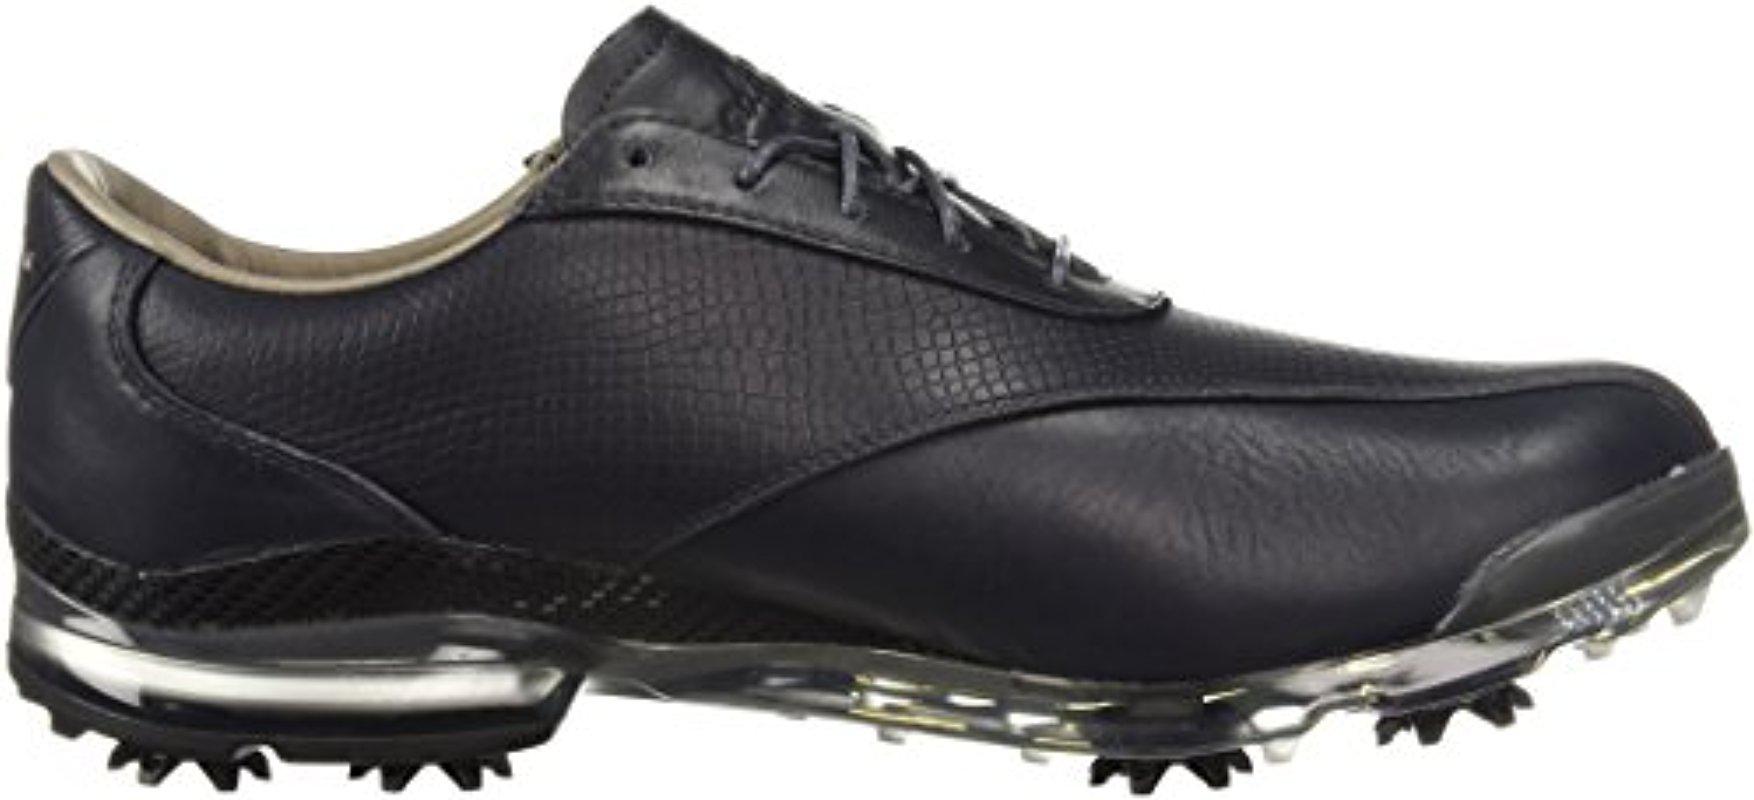 adidas Leather Adipure Tp 2.0 Golf Shoe in Black for Men - Lyst